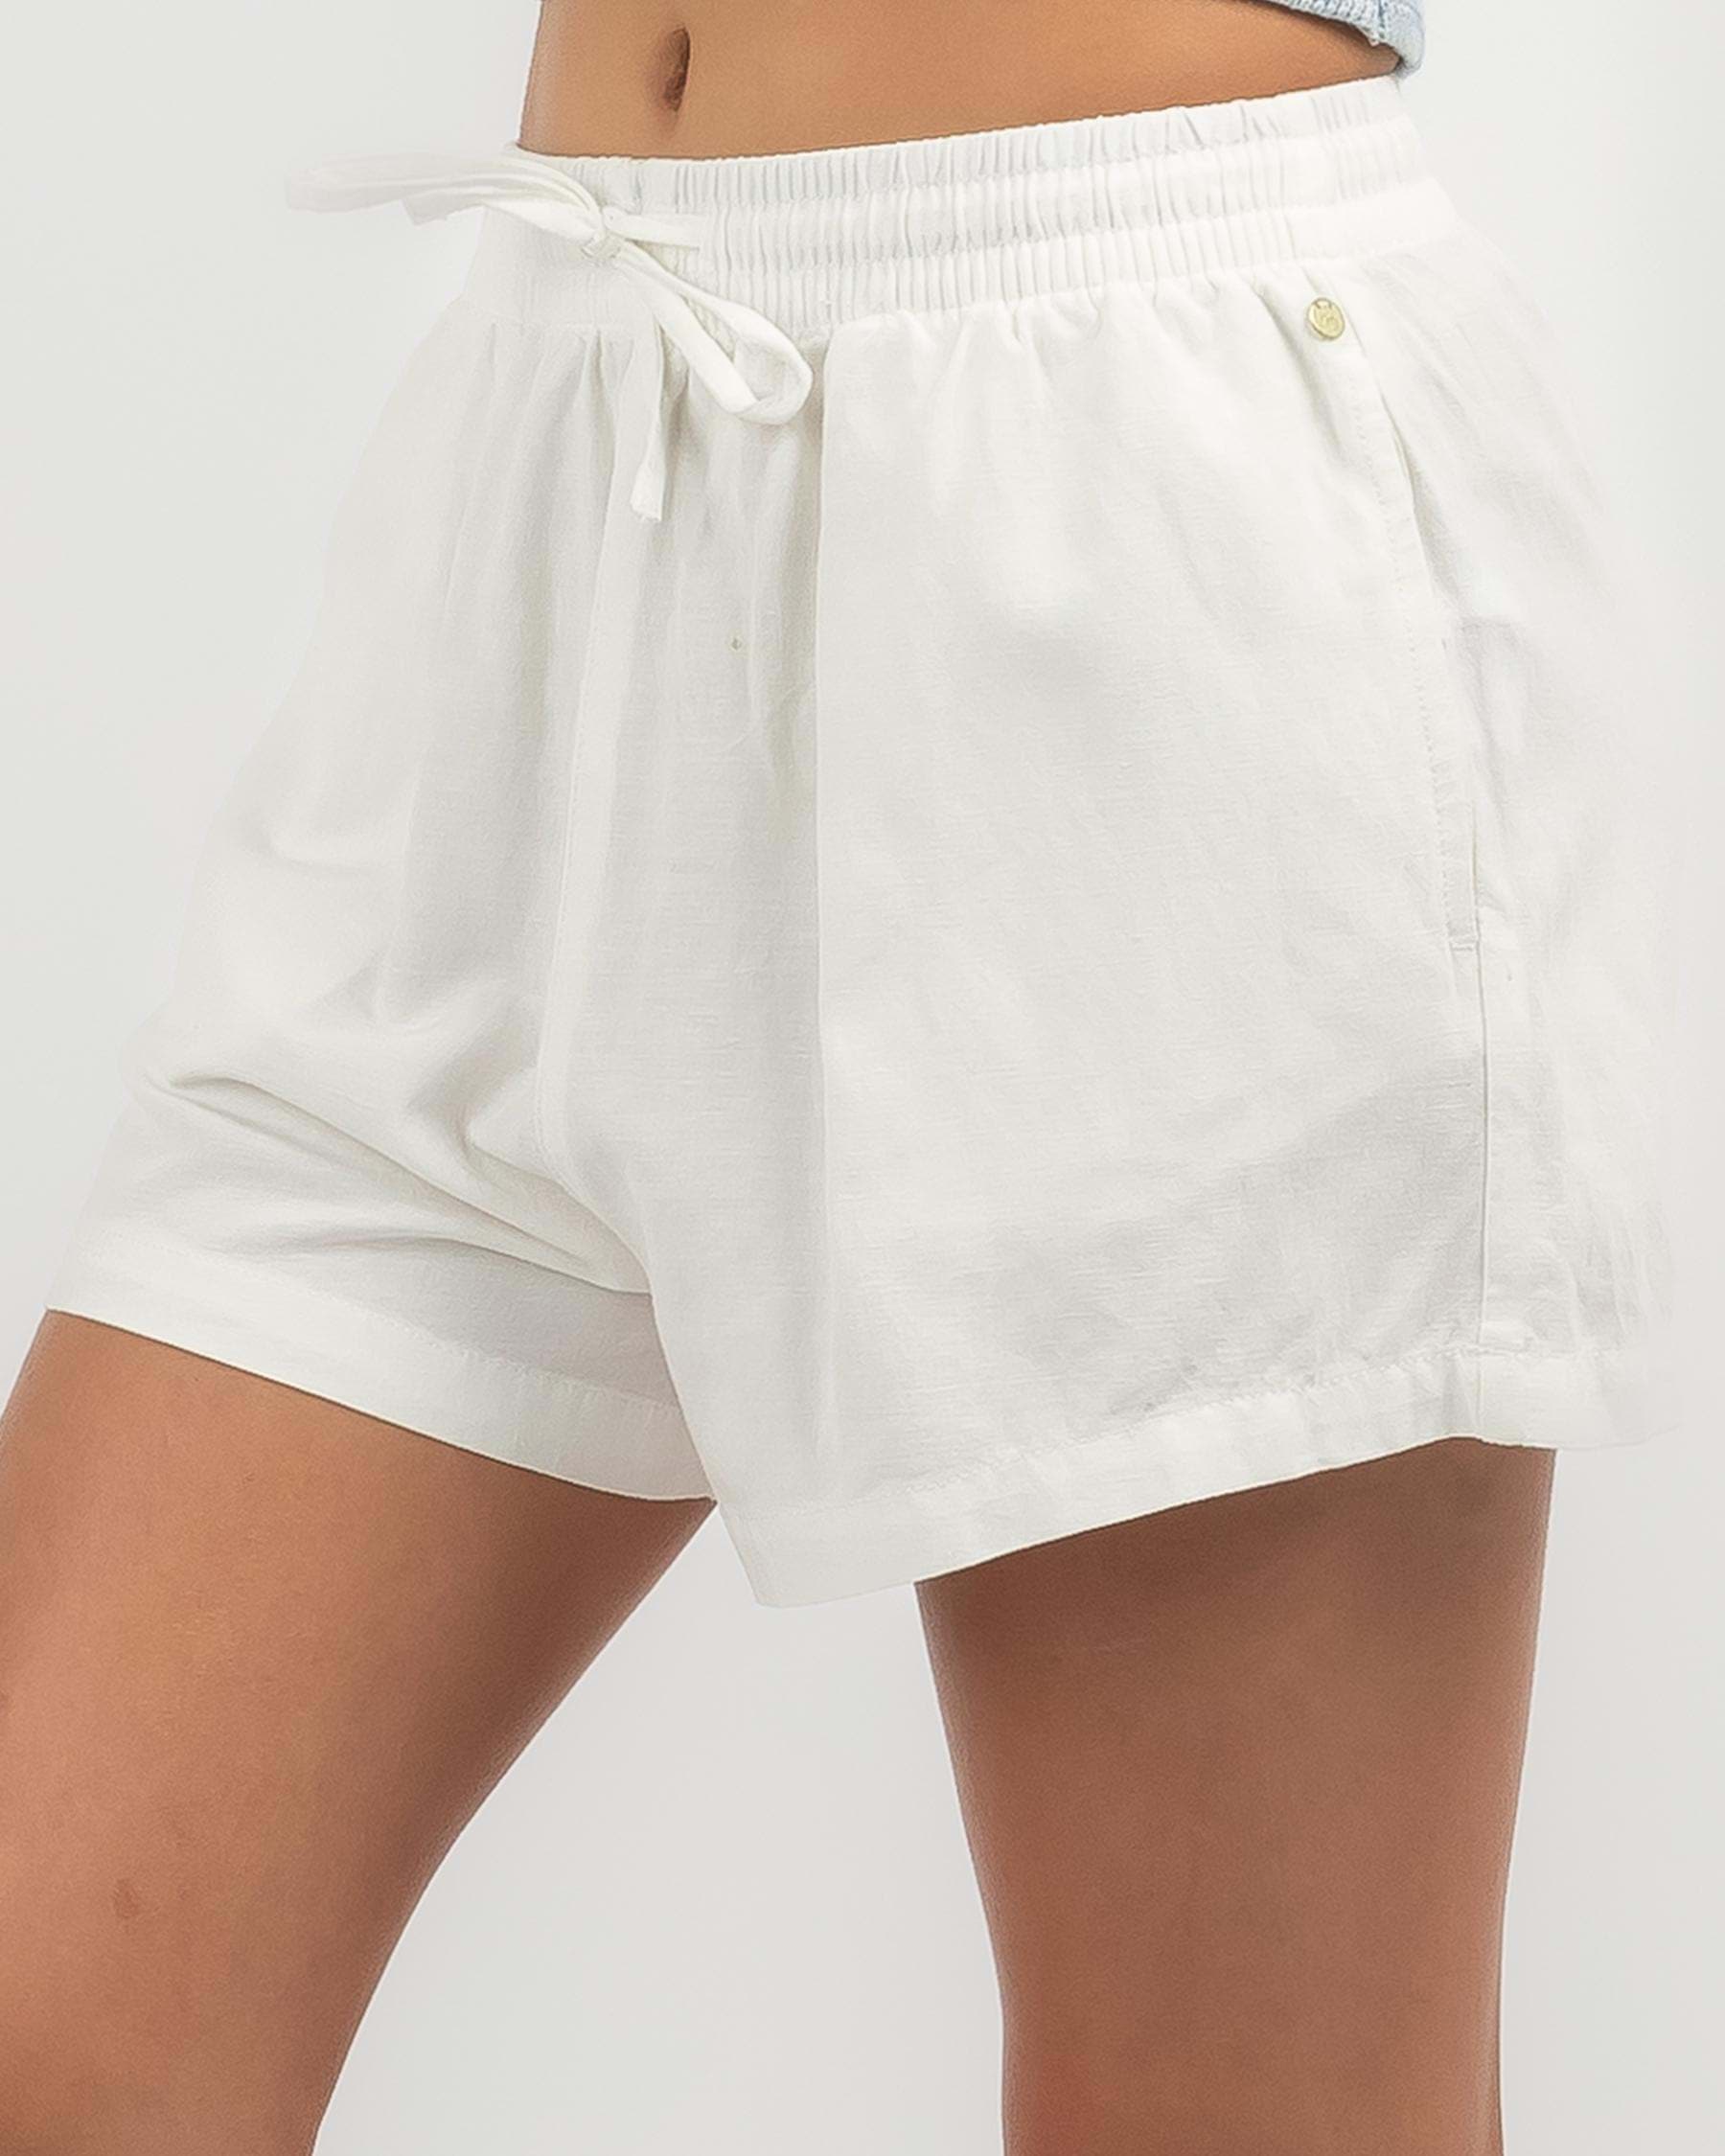 Shop Rusty Girls' Alannah Shorts In White - Fast Shipping & Easy ...